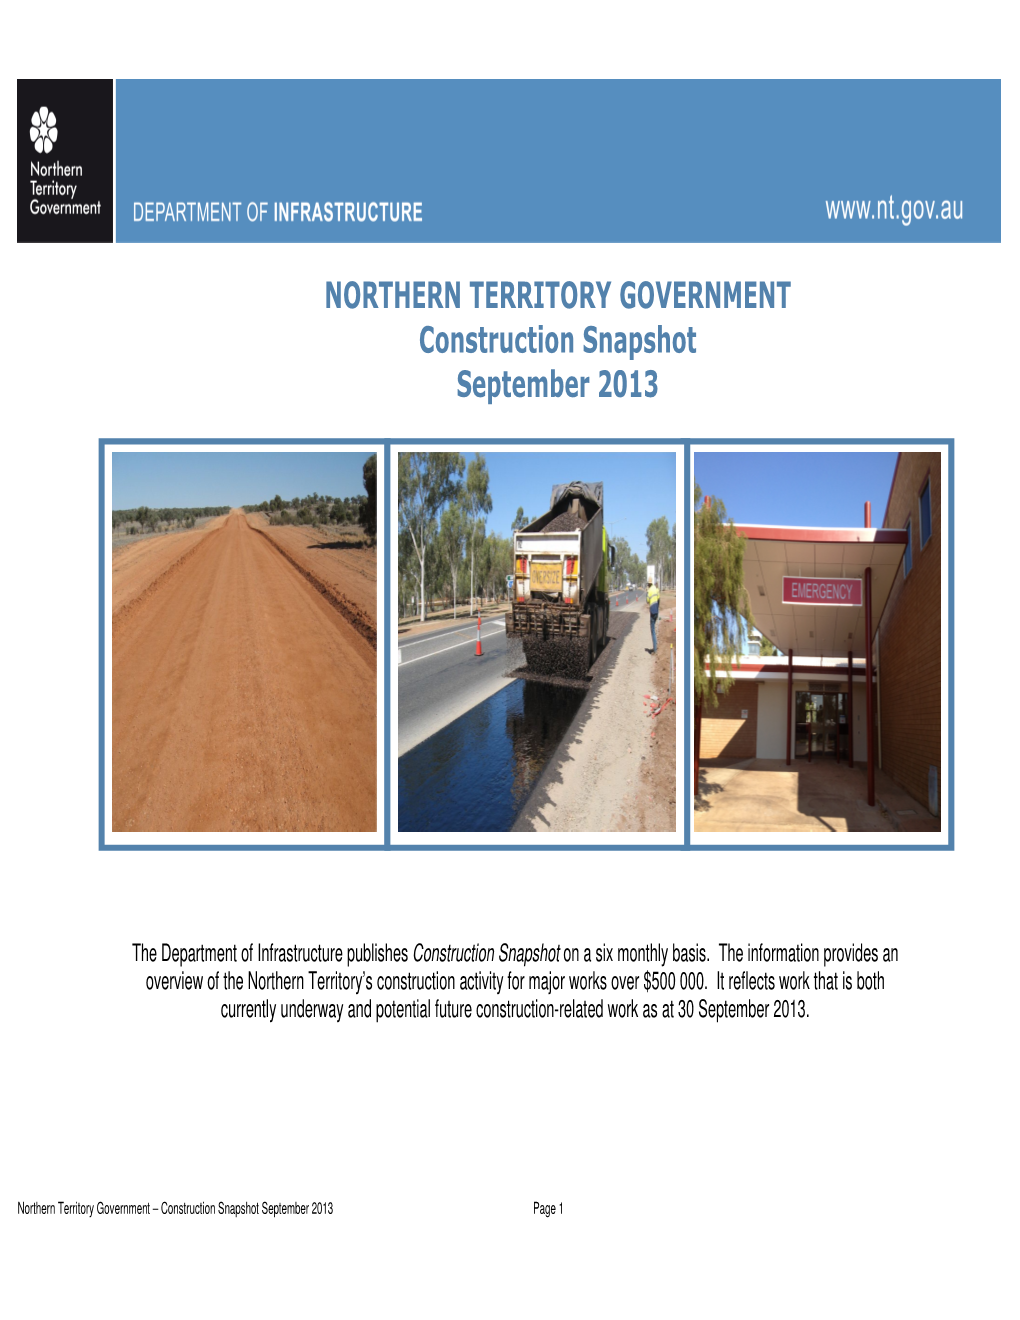 NORTHERN TERRITORY GOVERNMENT Construction Snapshot September 2013